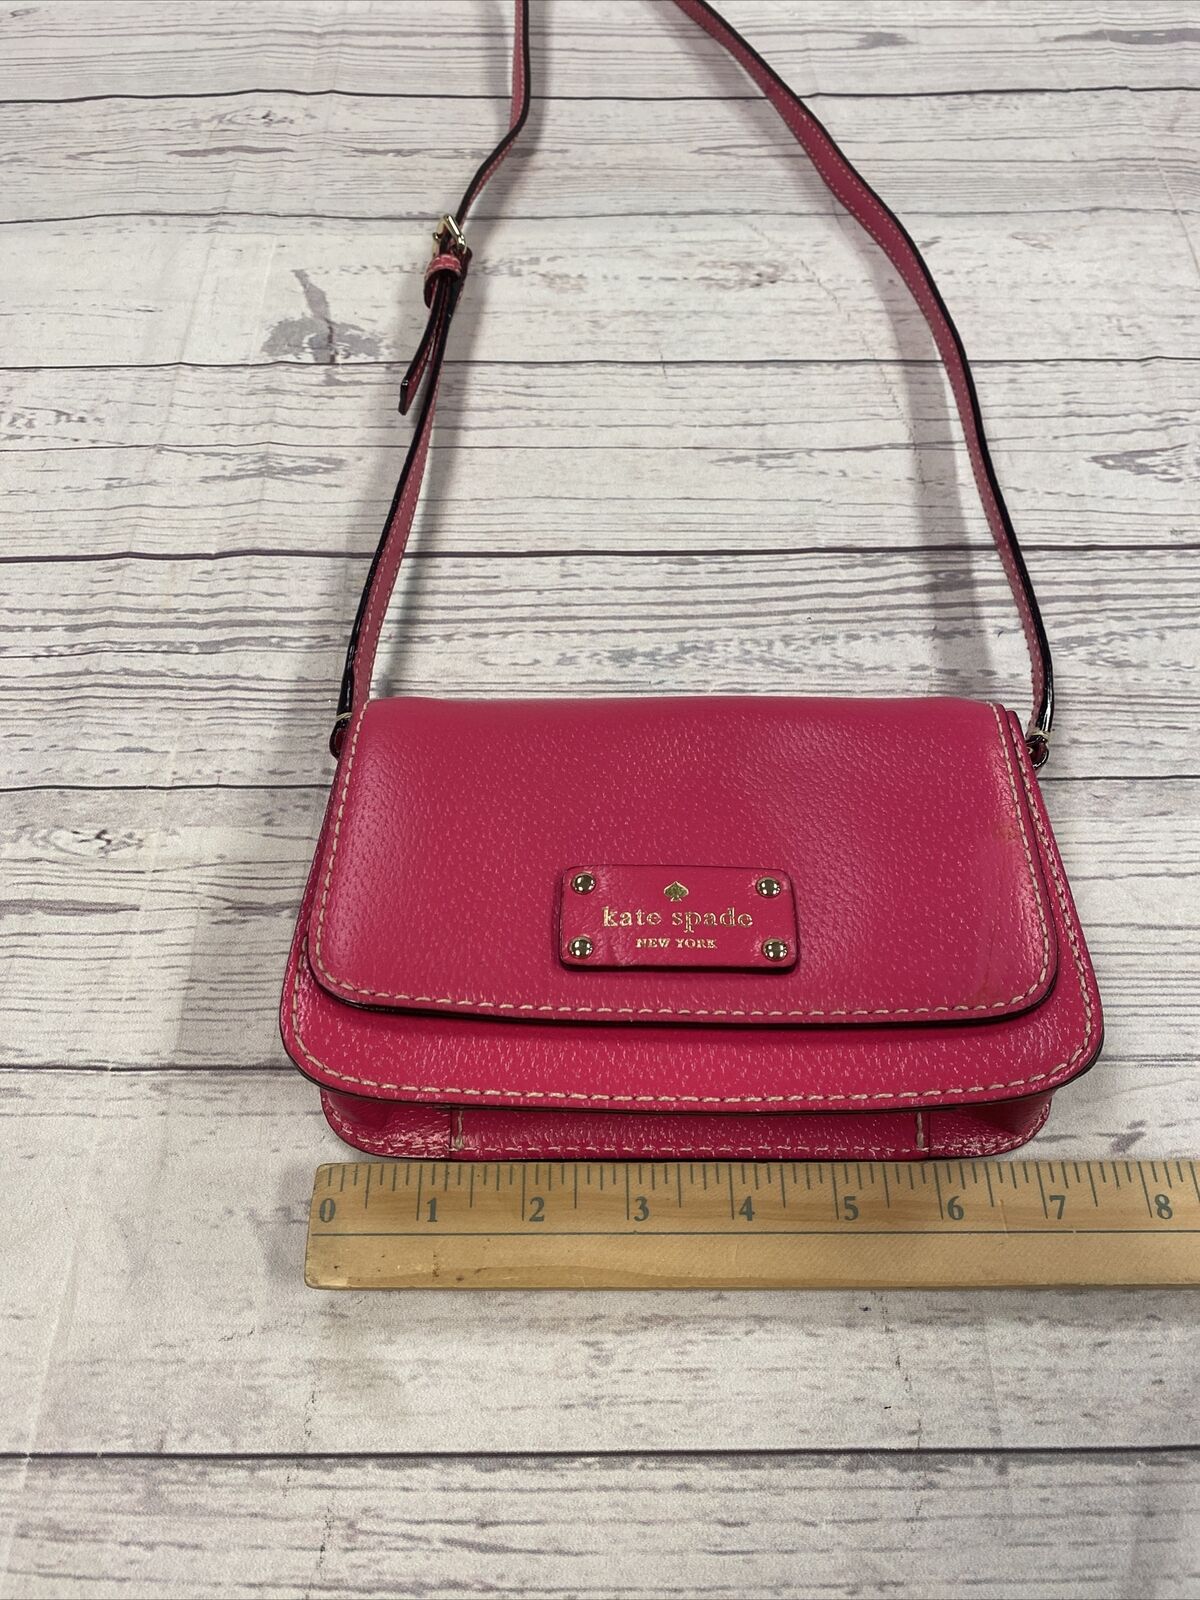 KATE SPADE Red Patent Leather Small Crossbody | eBay